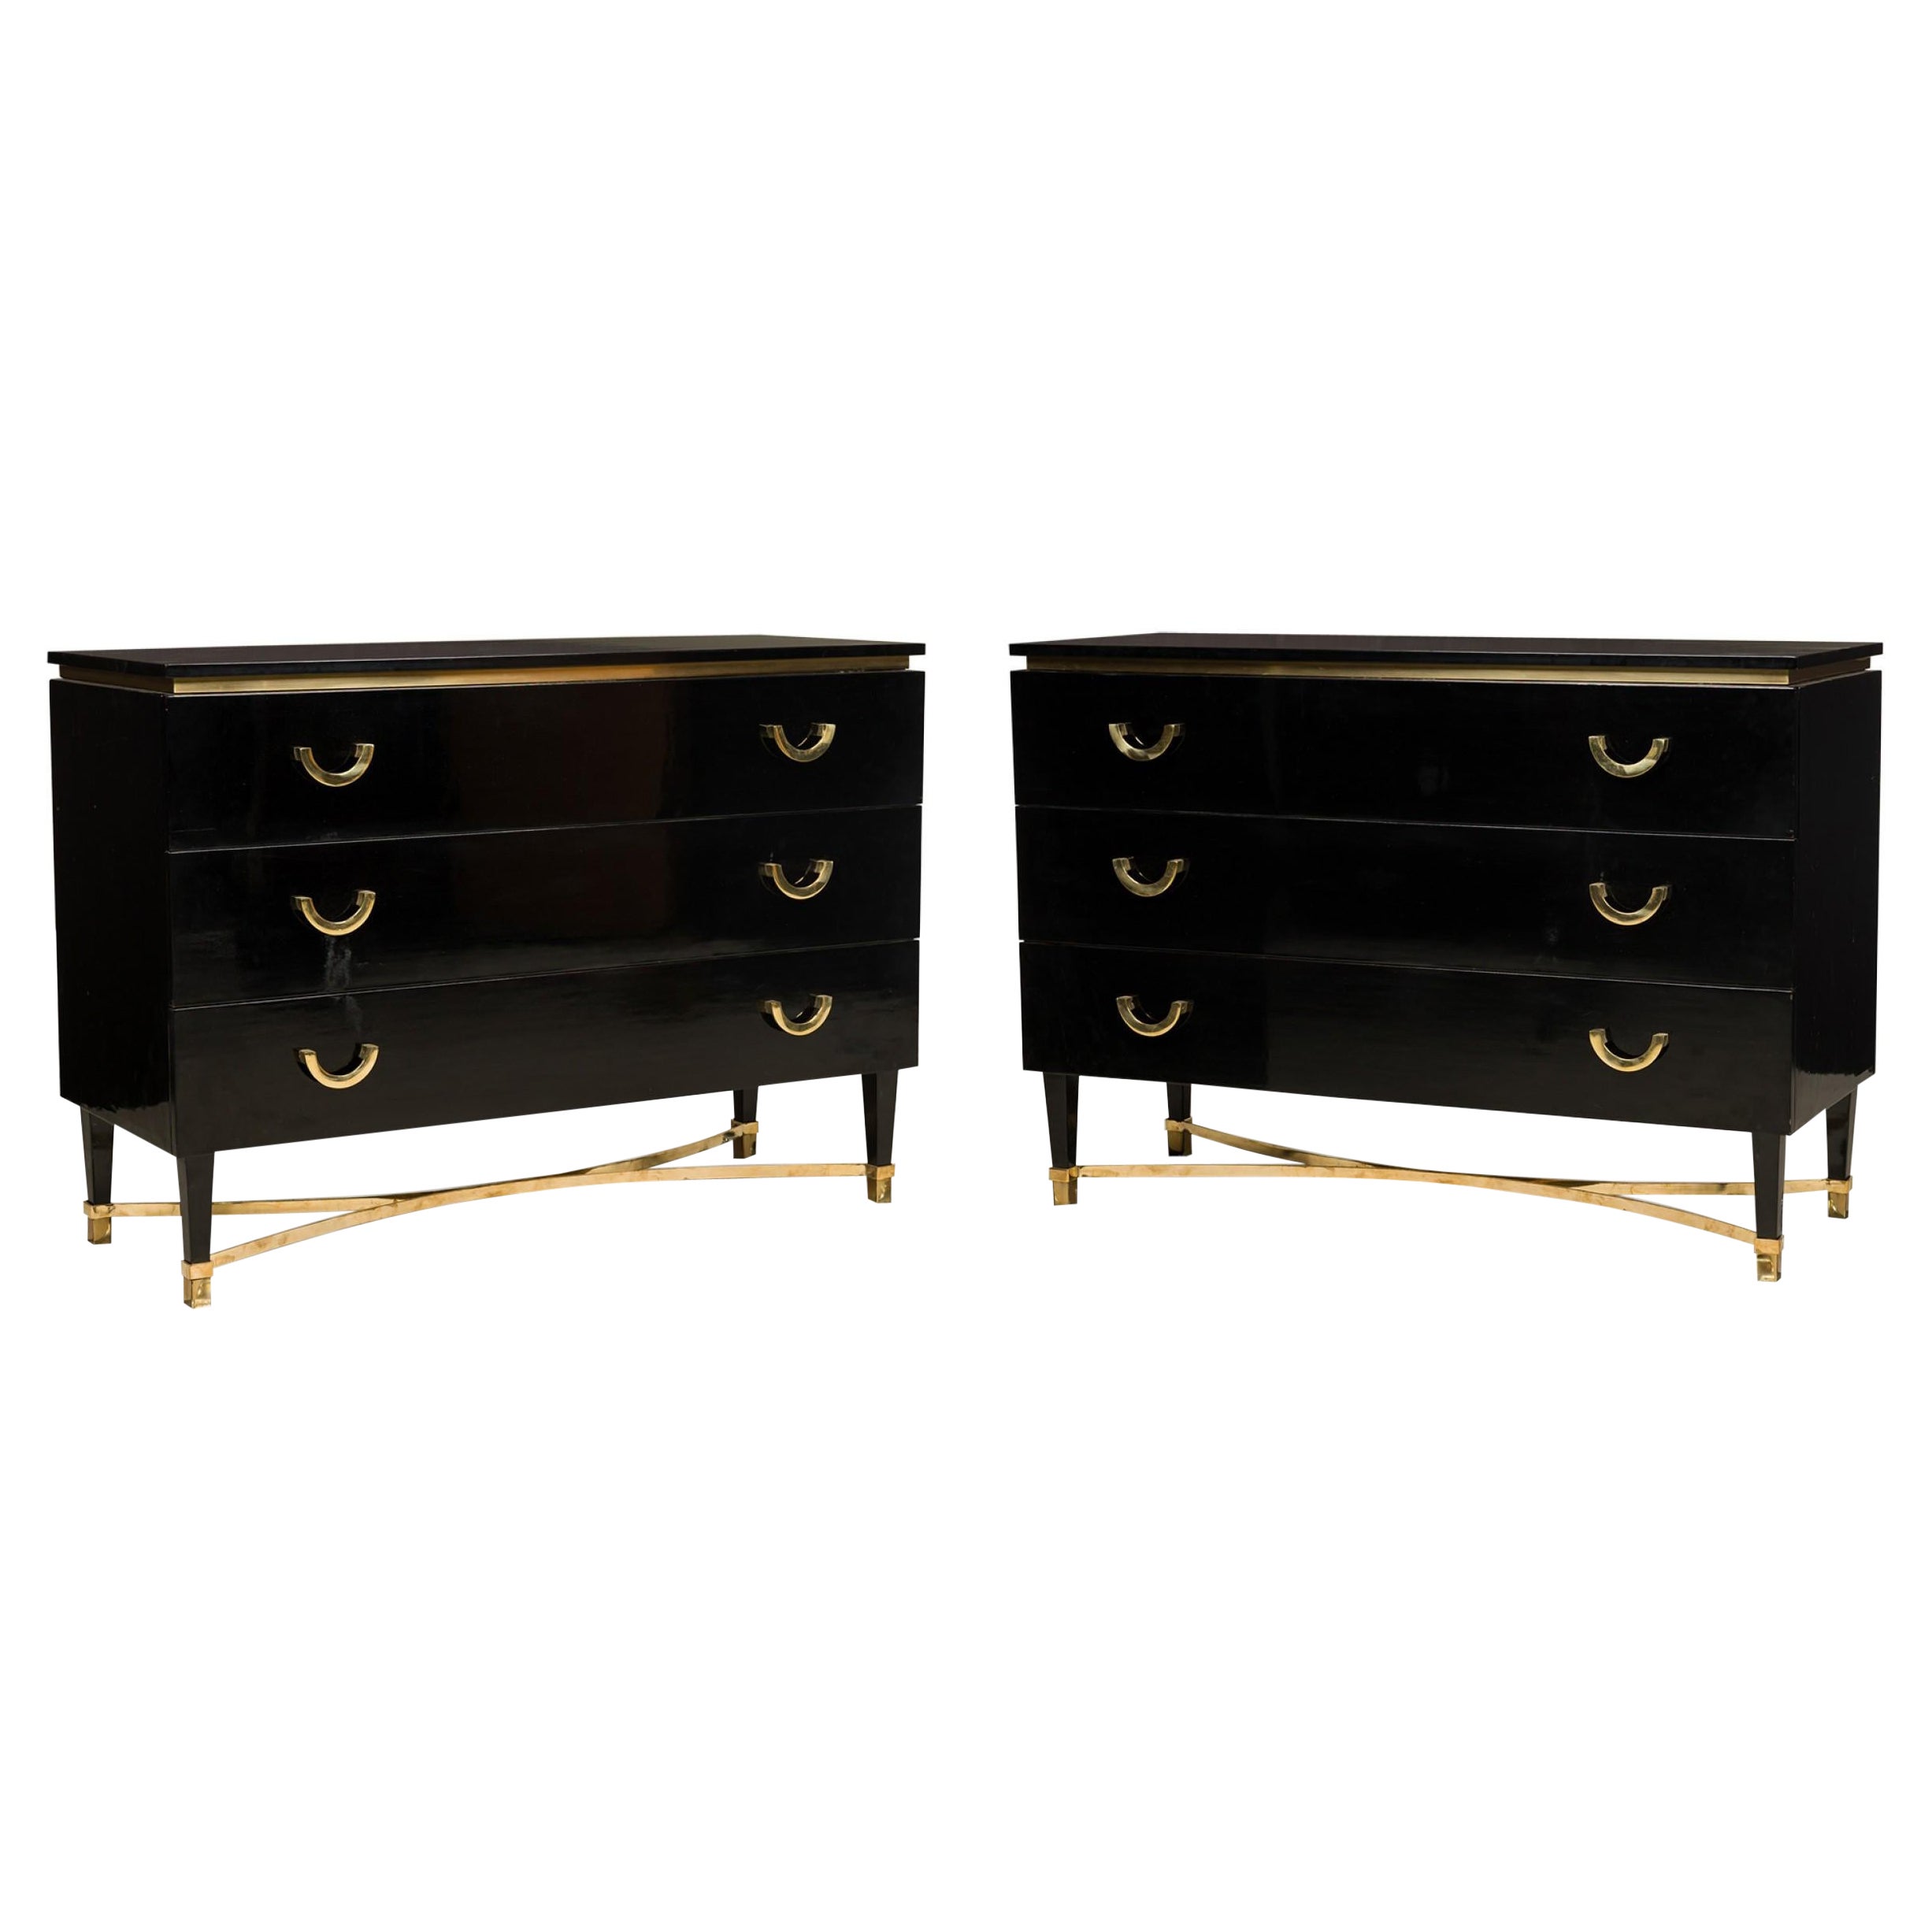 Pair of Continental Ebonized Wood & Bronze Mounted Dressers (Manner of Gucci) For Sale